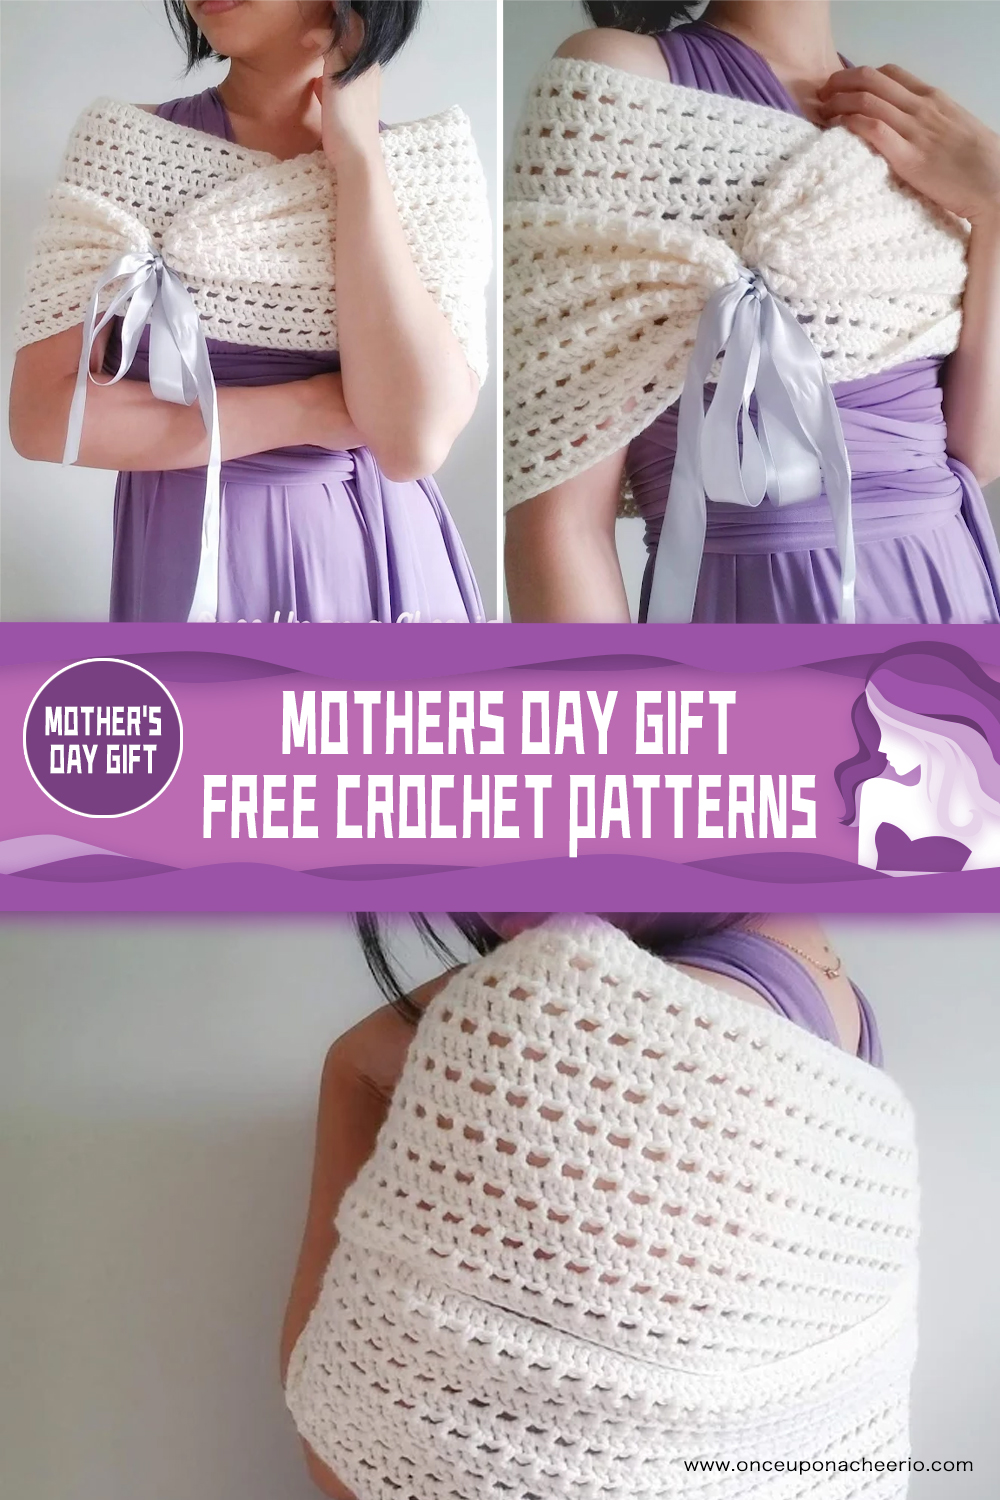 FREE Mother's Day Gift Crochet Patterns